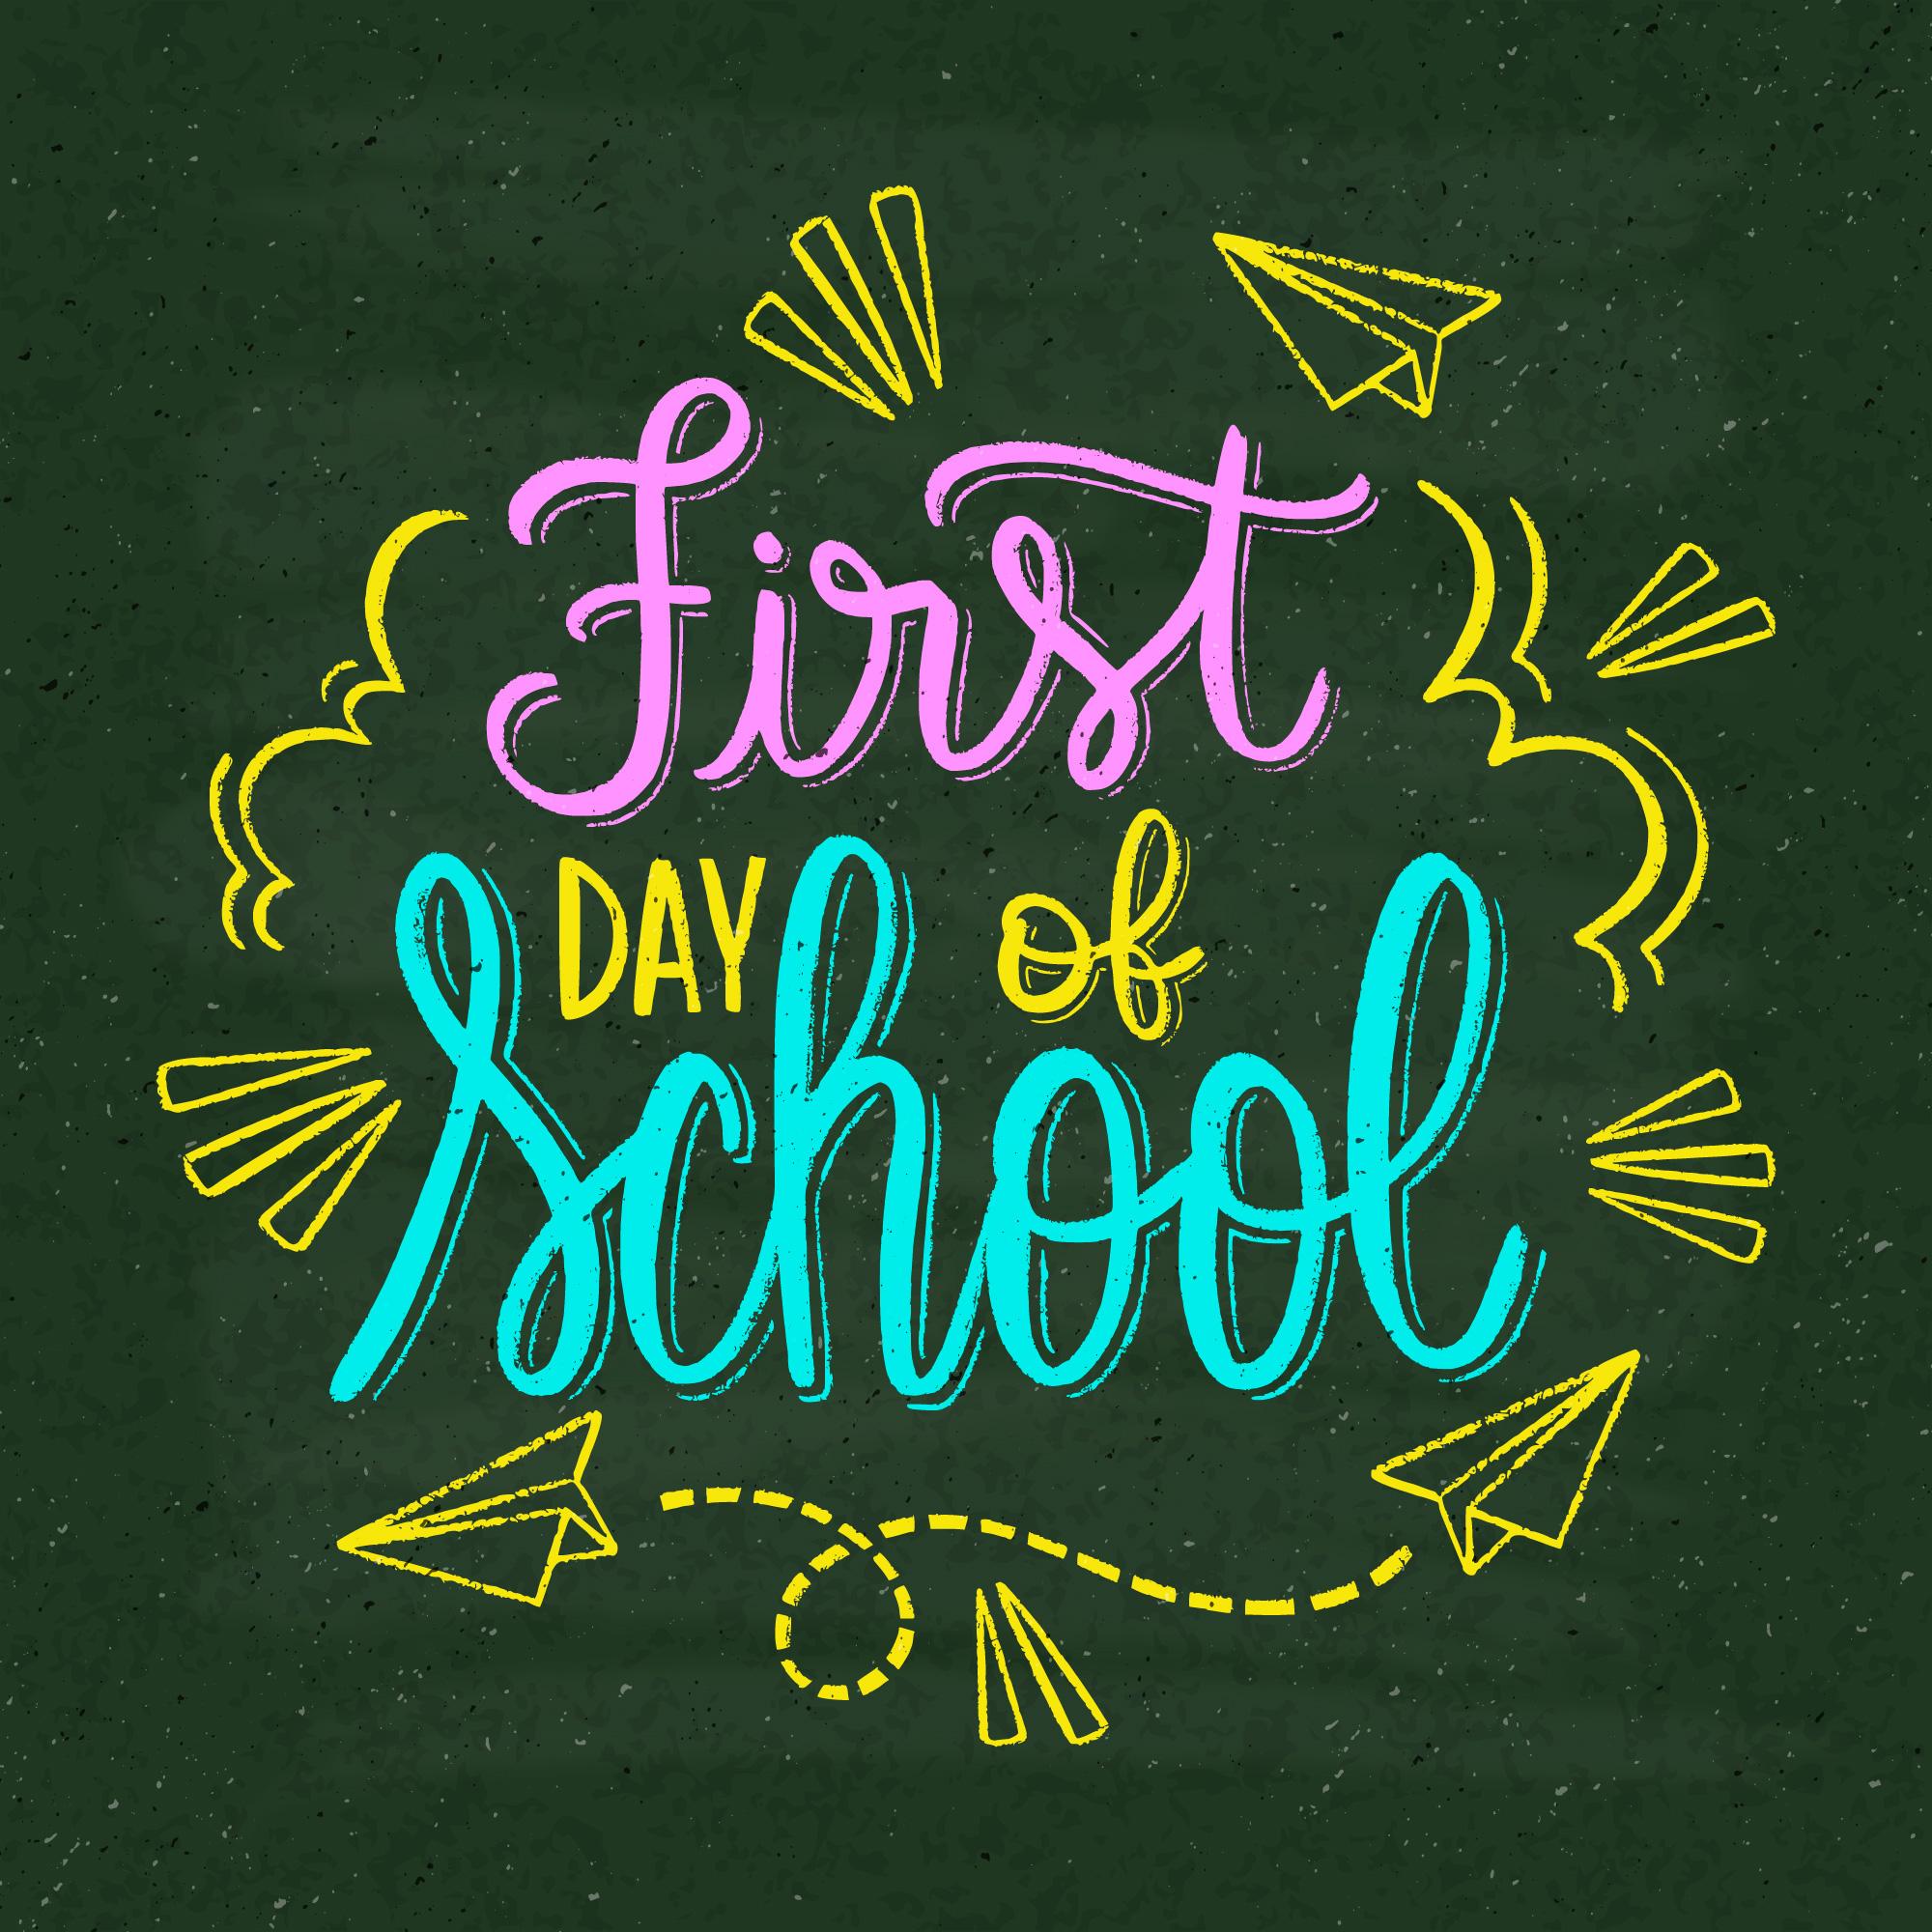 first-day-of-school-is-august-31st-dublin-consolidated-school